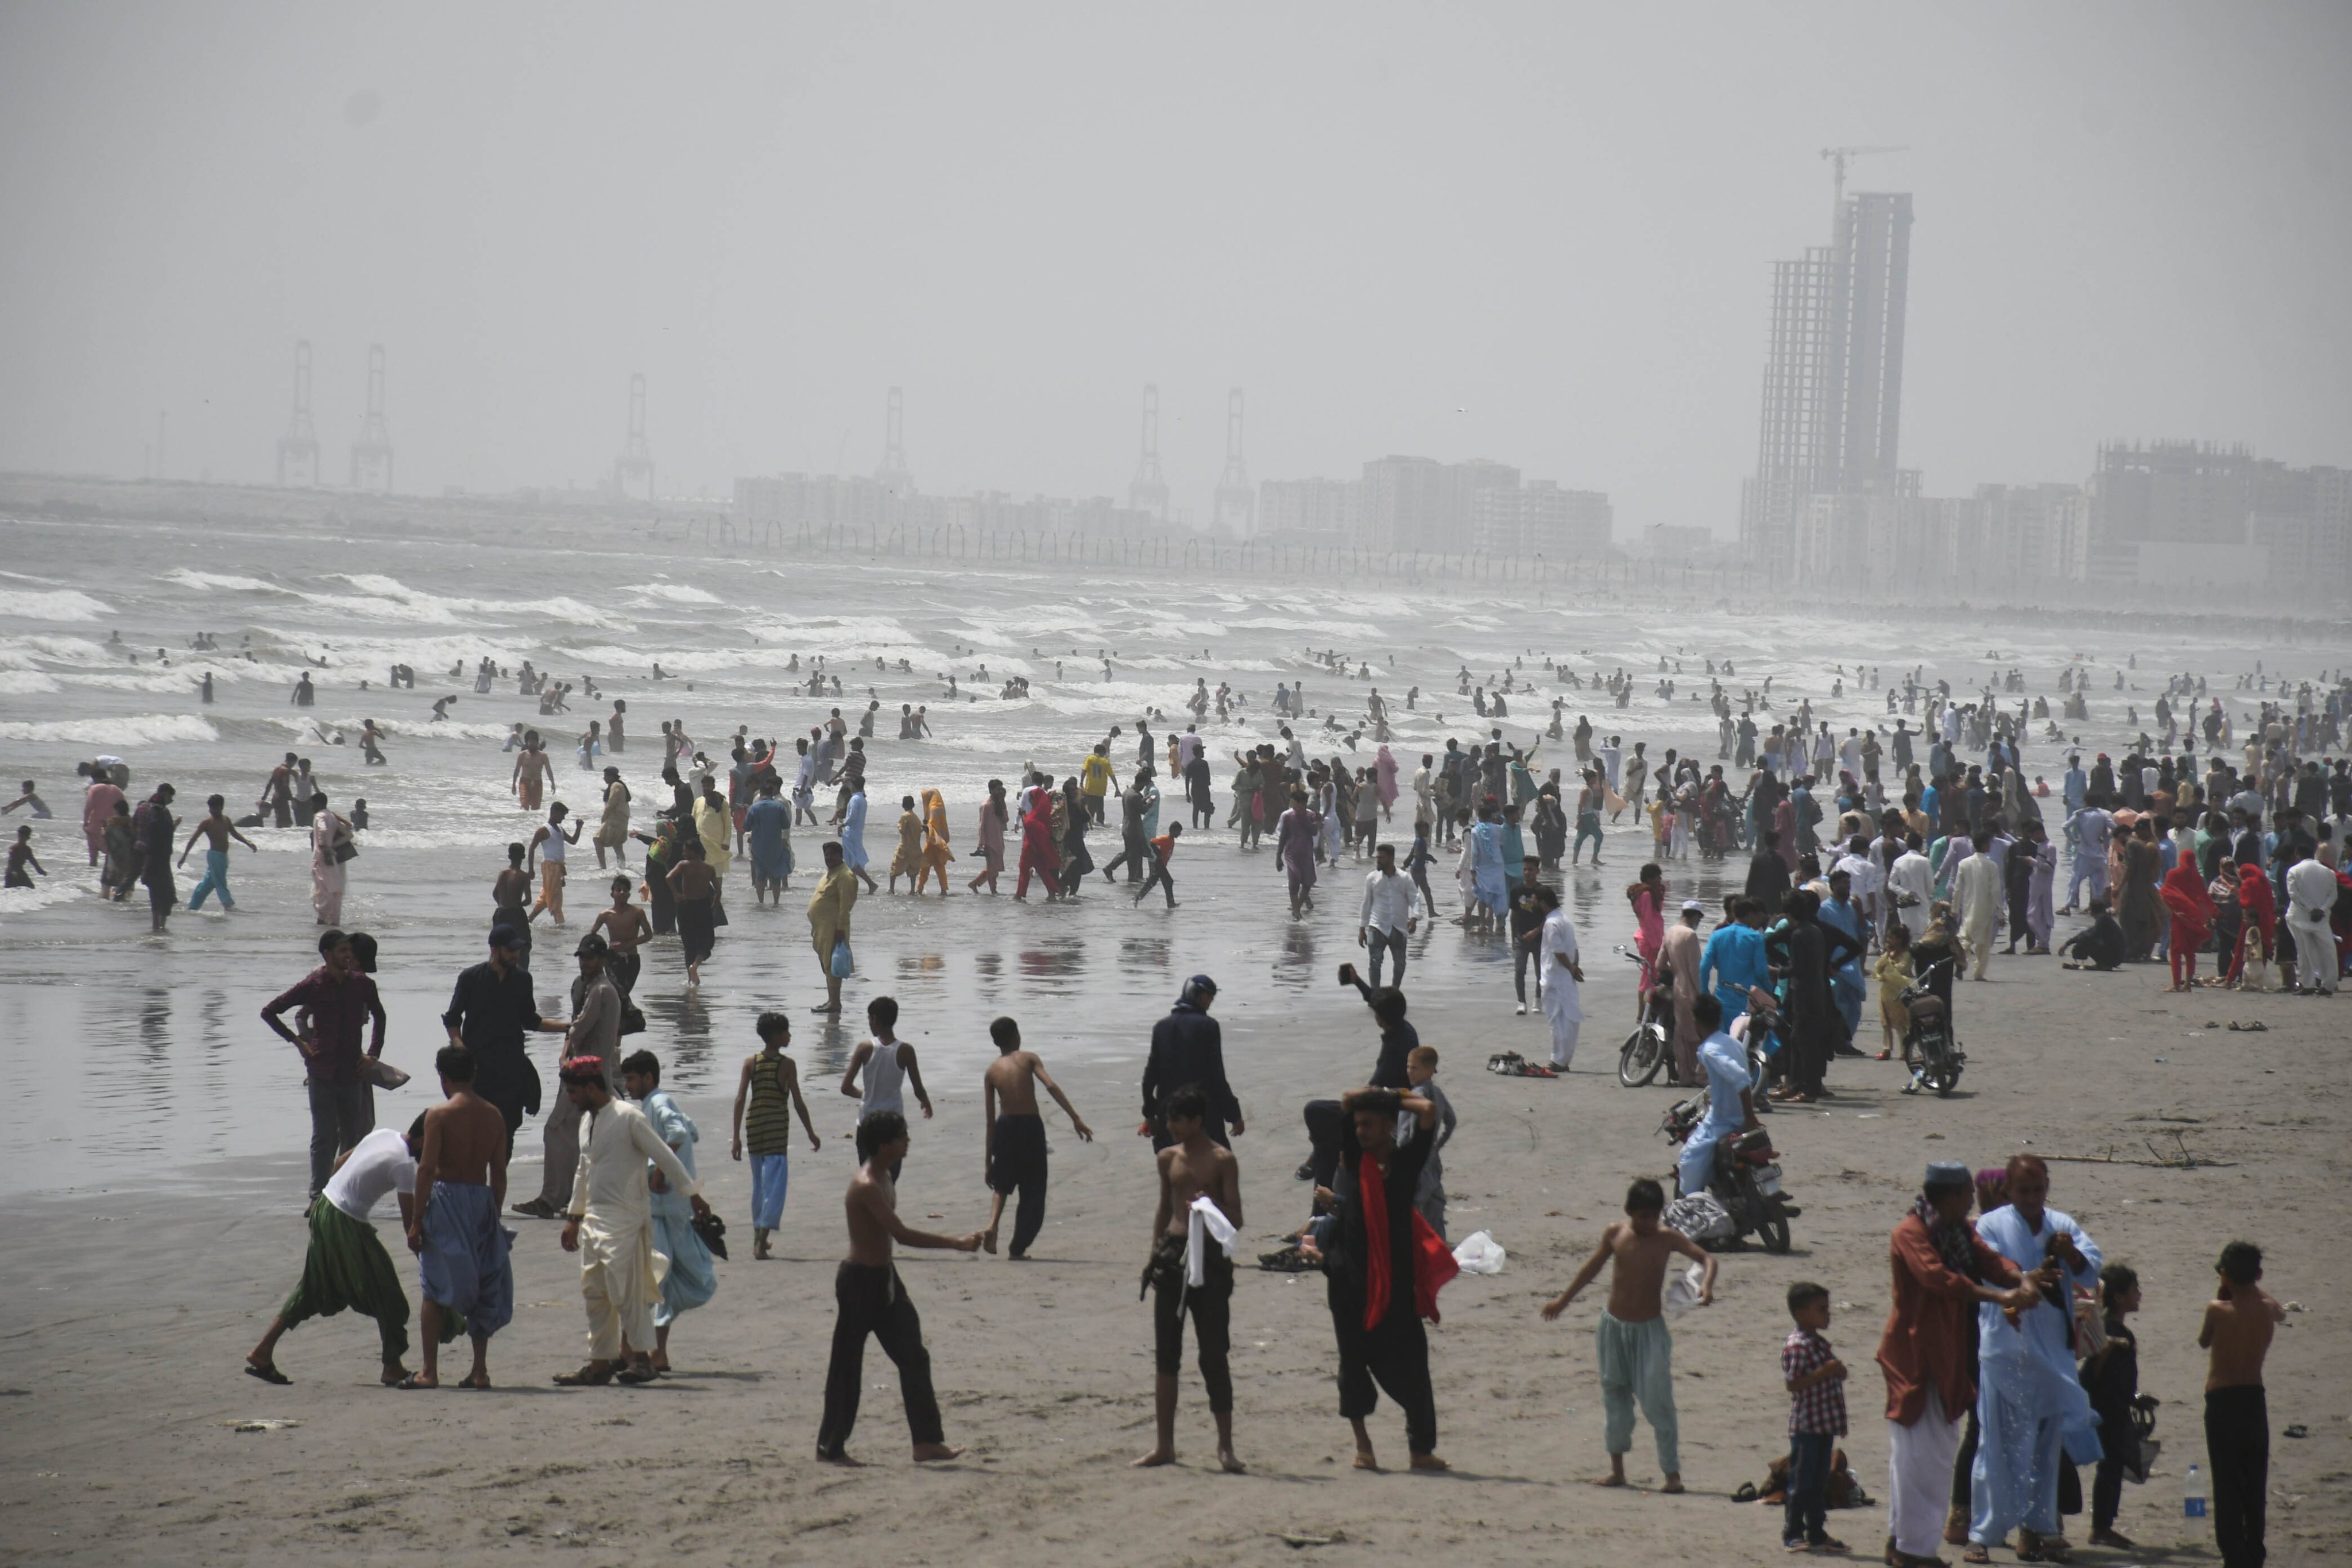 Pakistanis gather at Clifton Beach during Eid-al-Fitr holiday